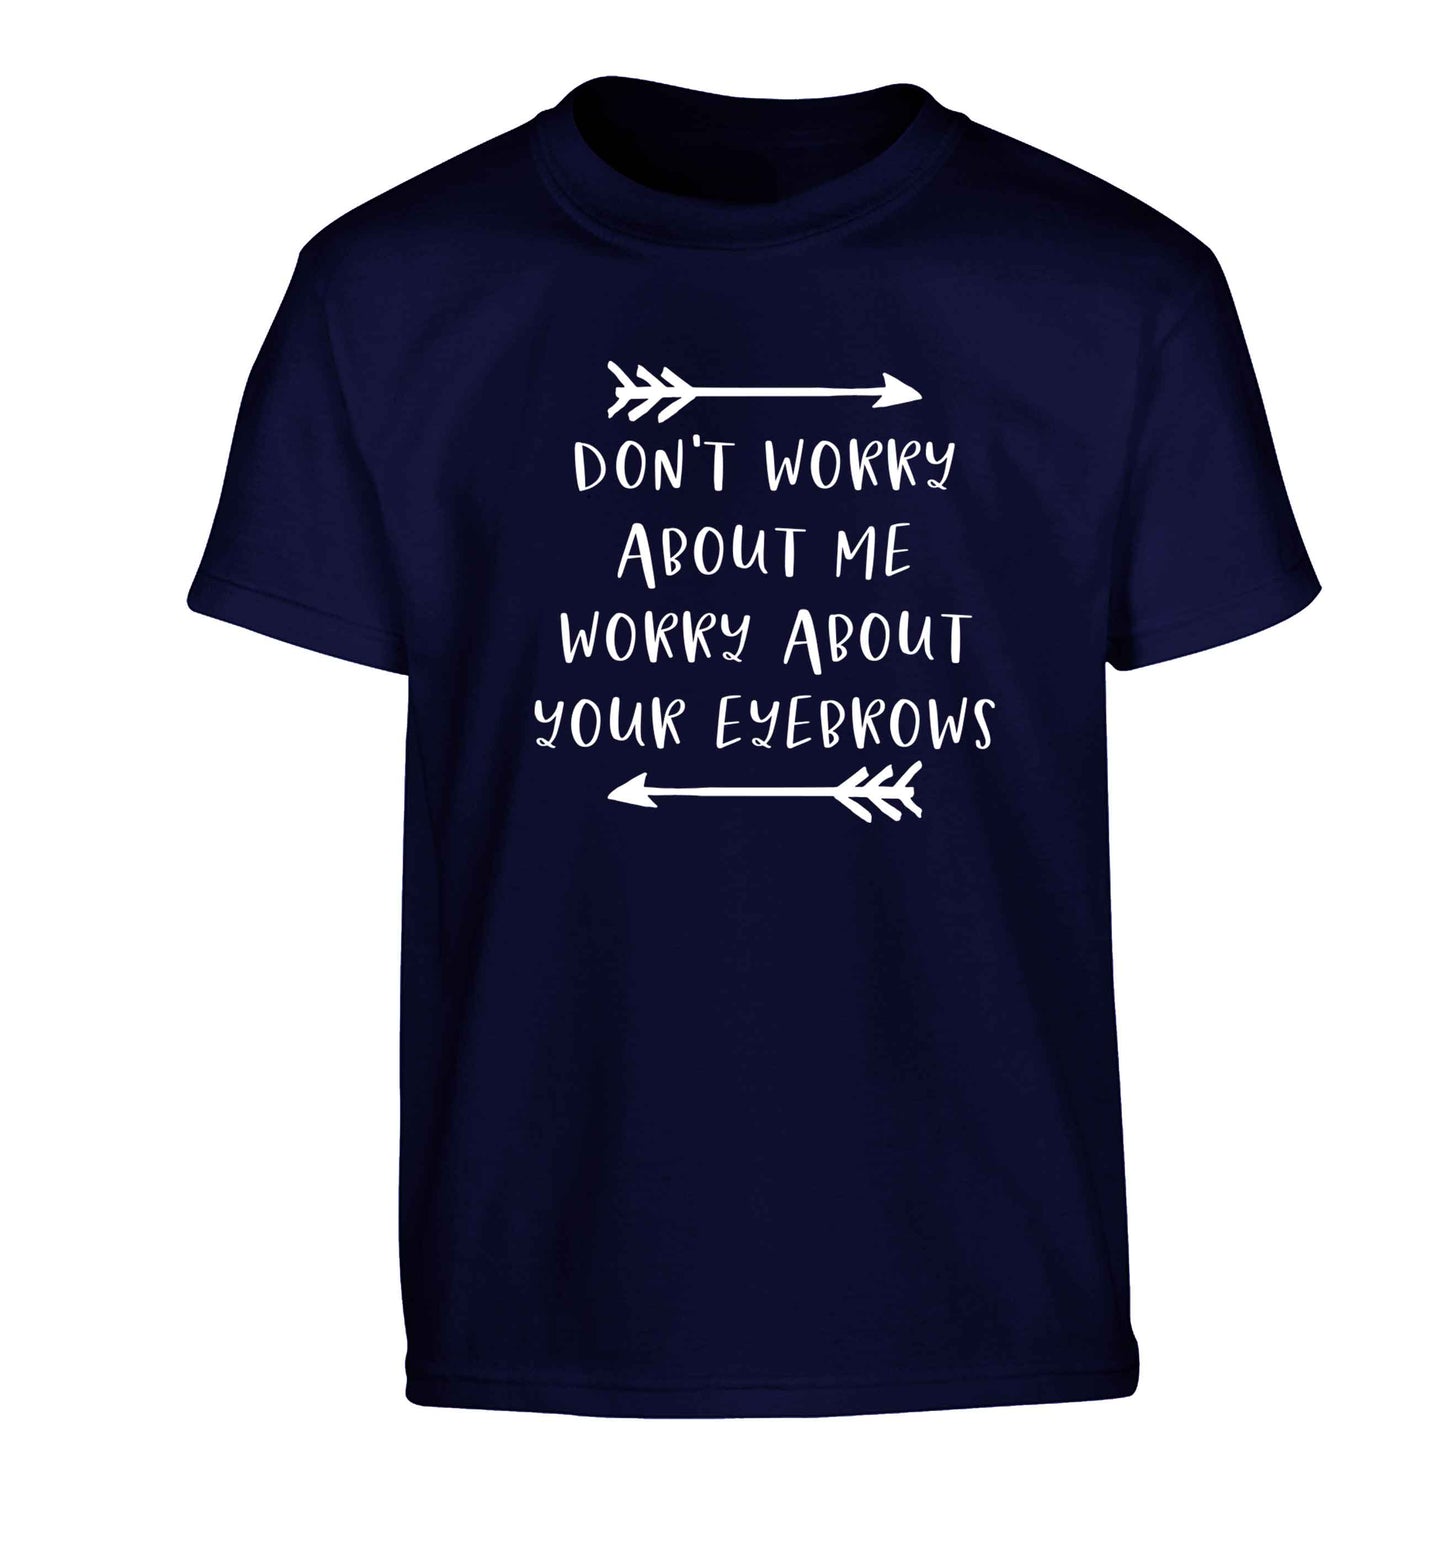 Don't worry about me worry about your eyebrows Children's navy Tshirt 12-13 Years